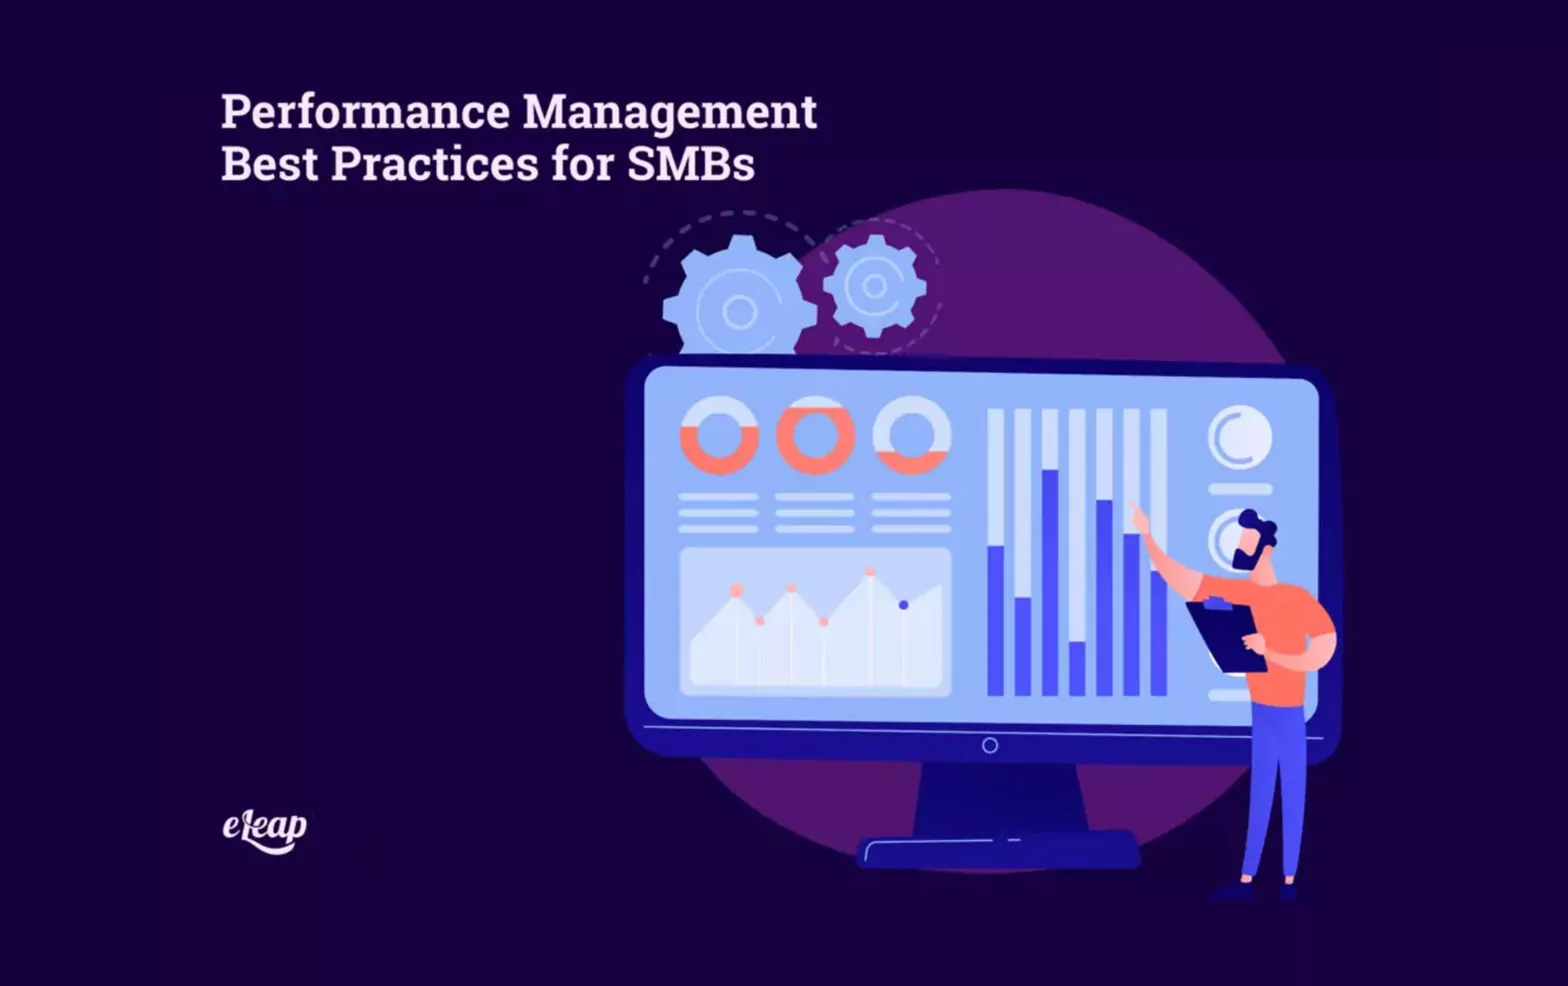 Performance Management Best Practices for SMBs